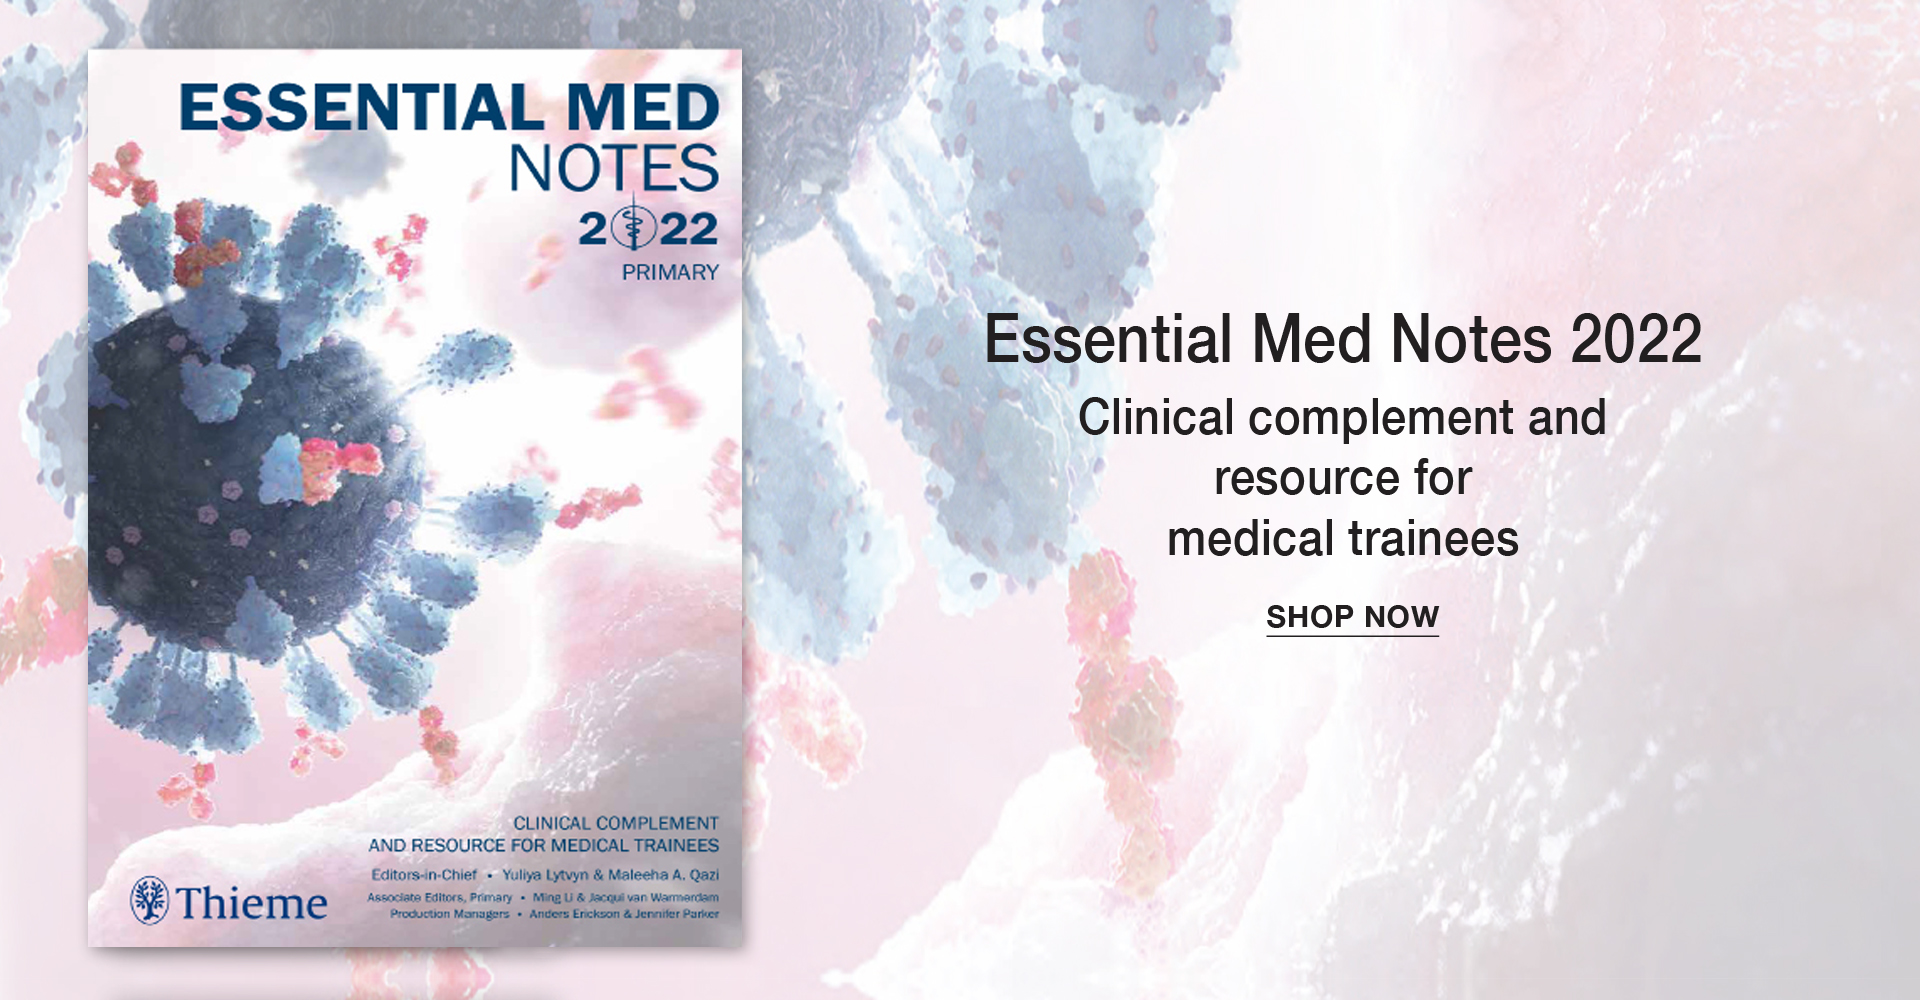 Essential Med Notes 2022: Clinical Complement And Resource For Medical Trainees